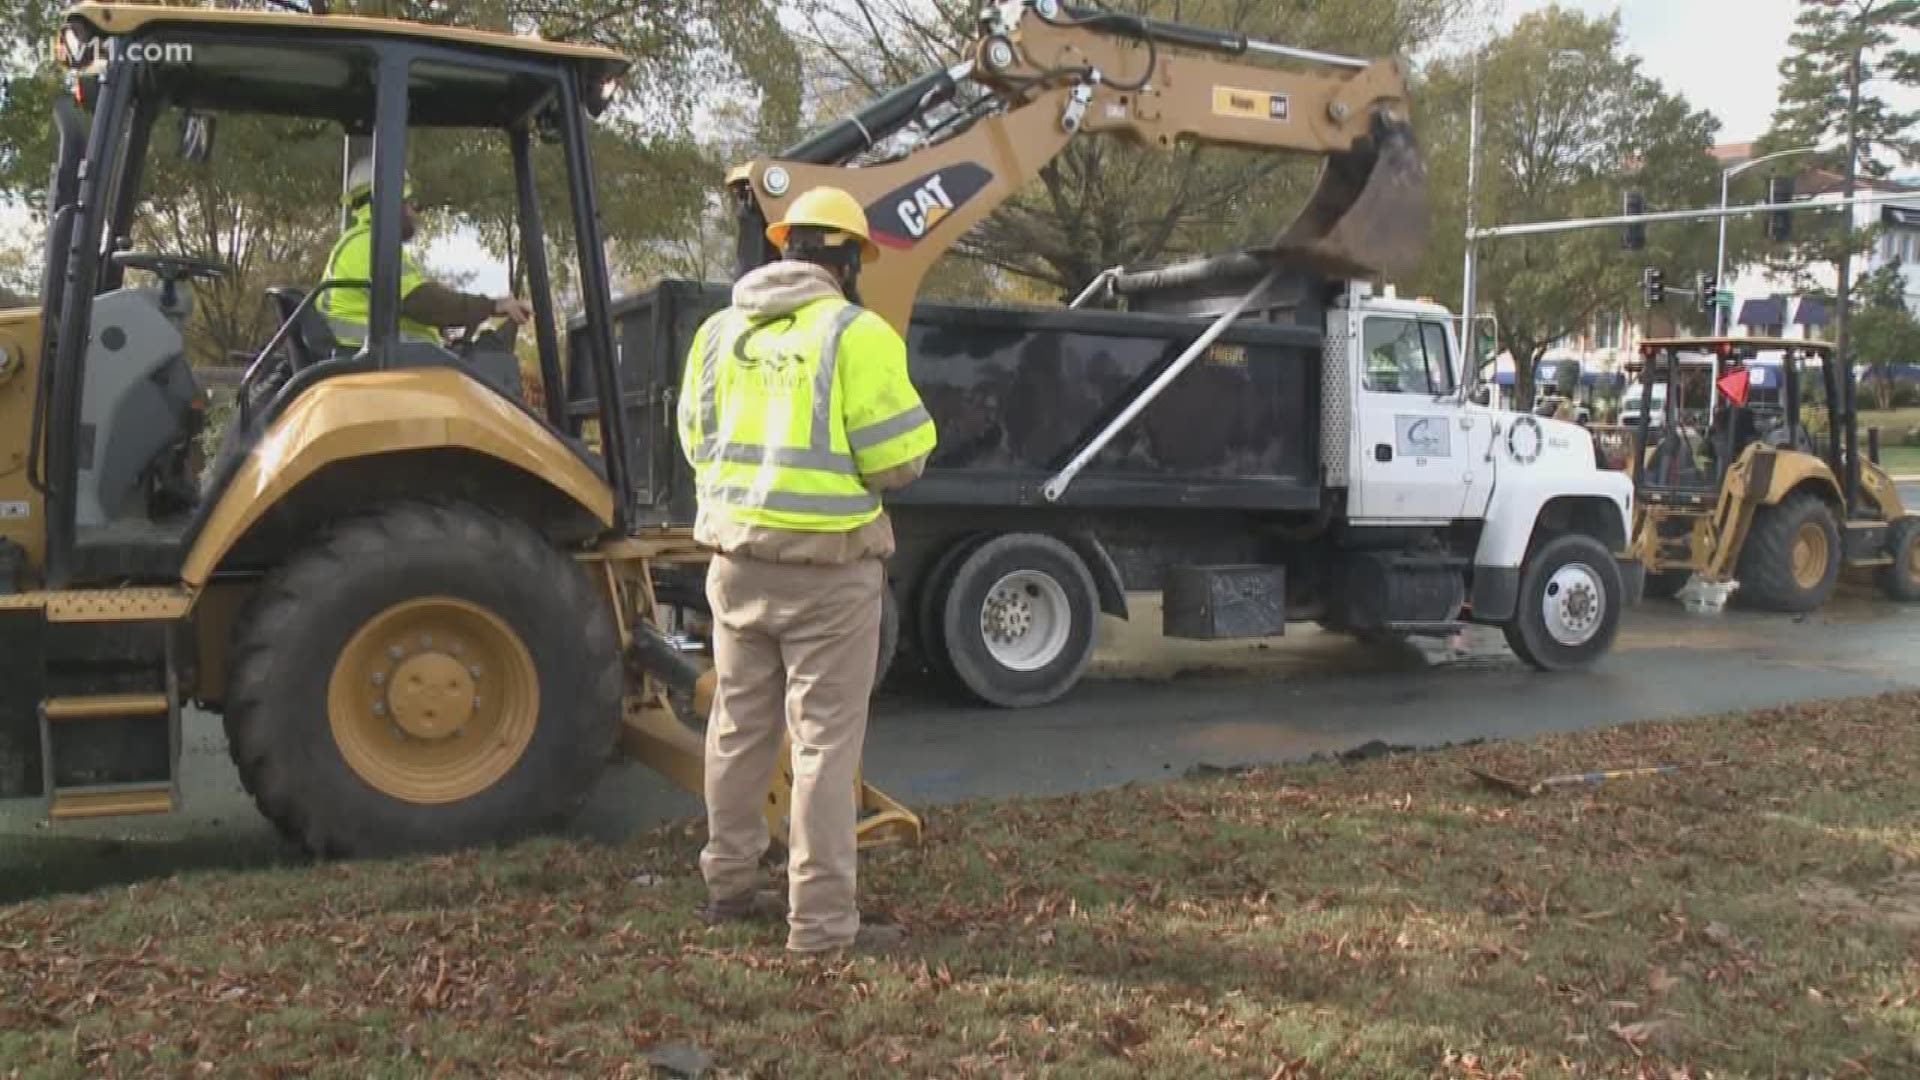 Central Arkansas Water crews are working to repair a 12-inch water main break on a busy intersection of Cantrell.